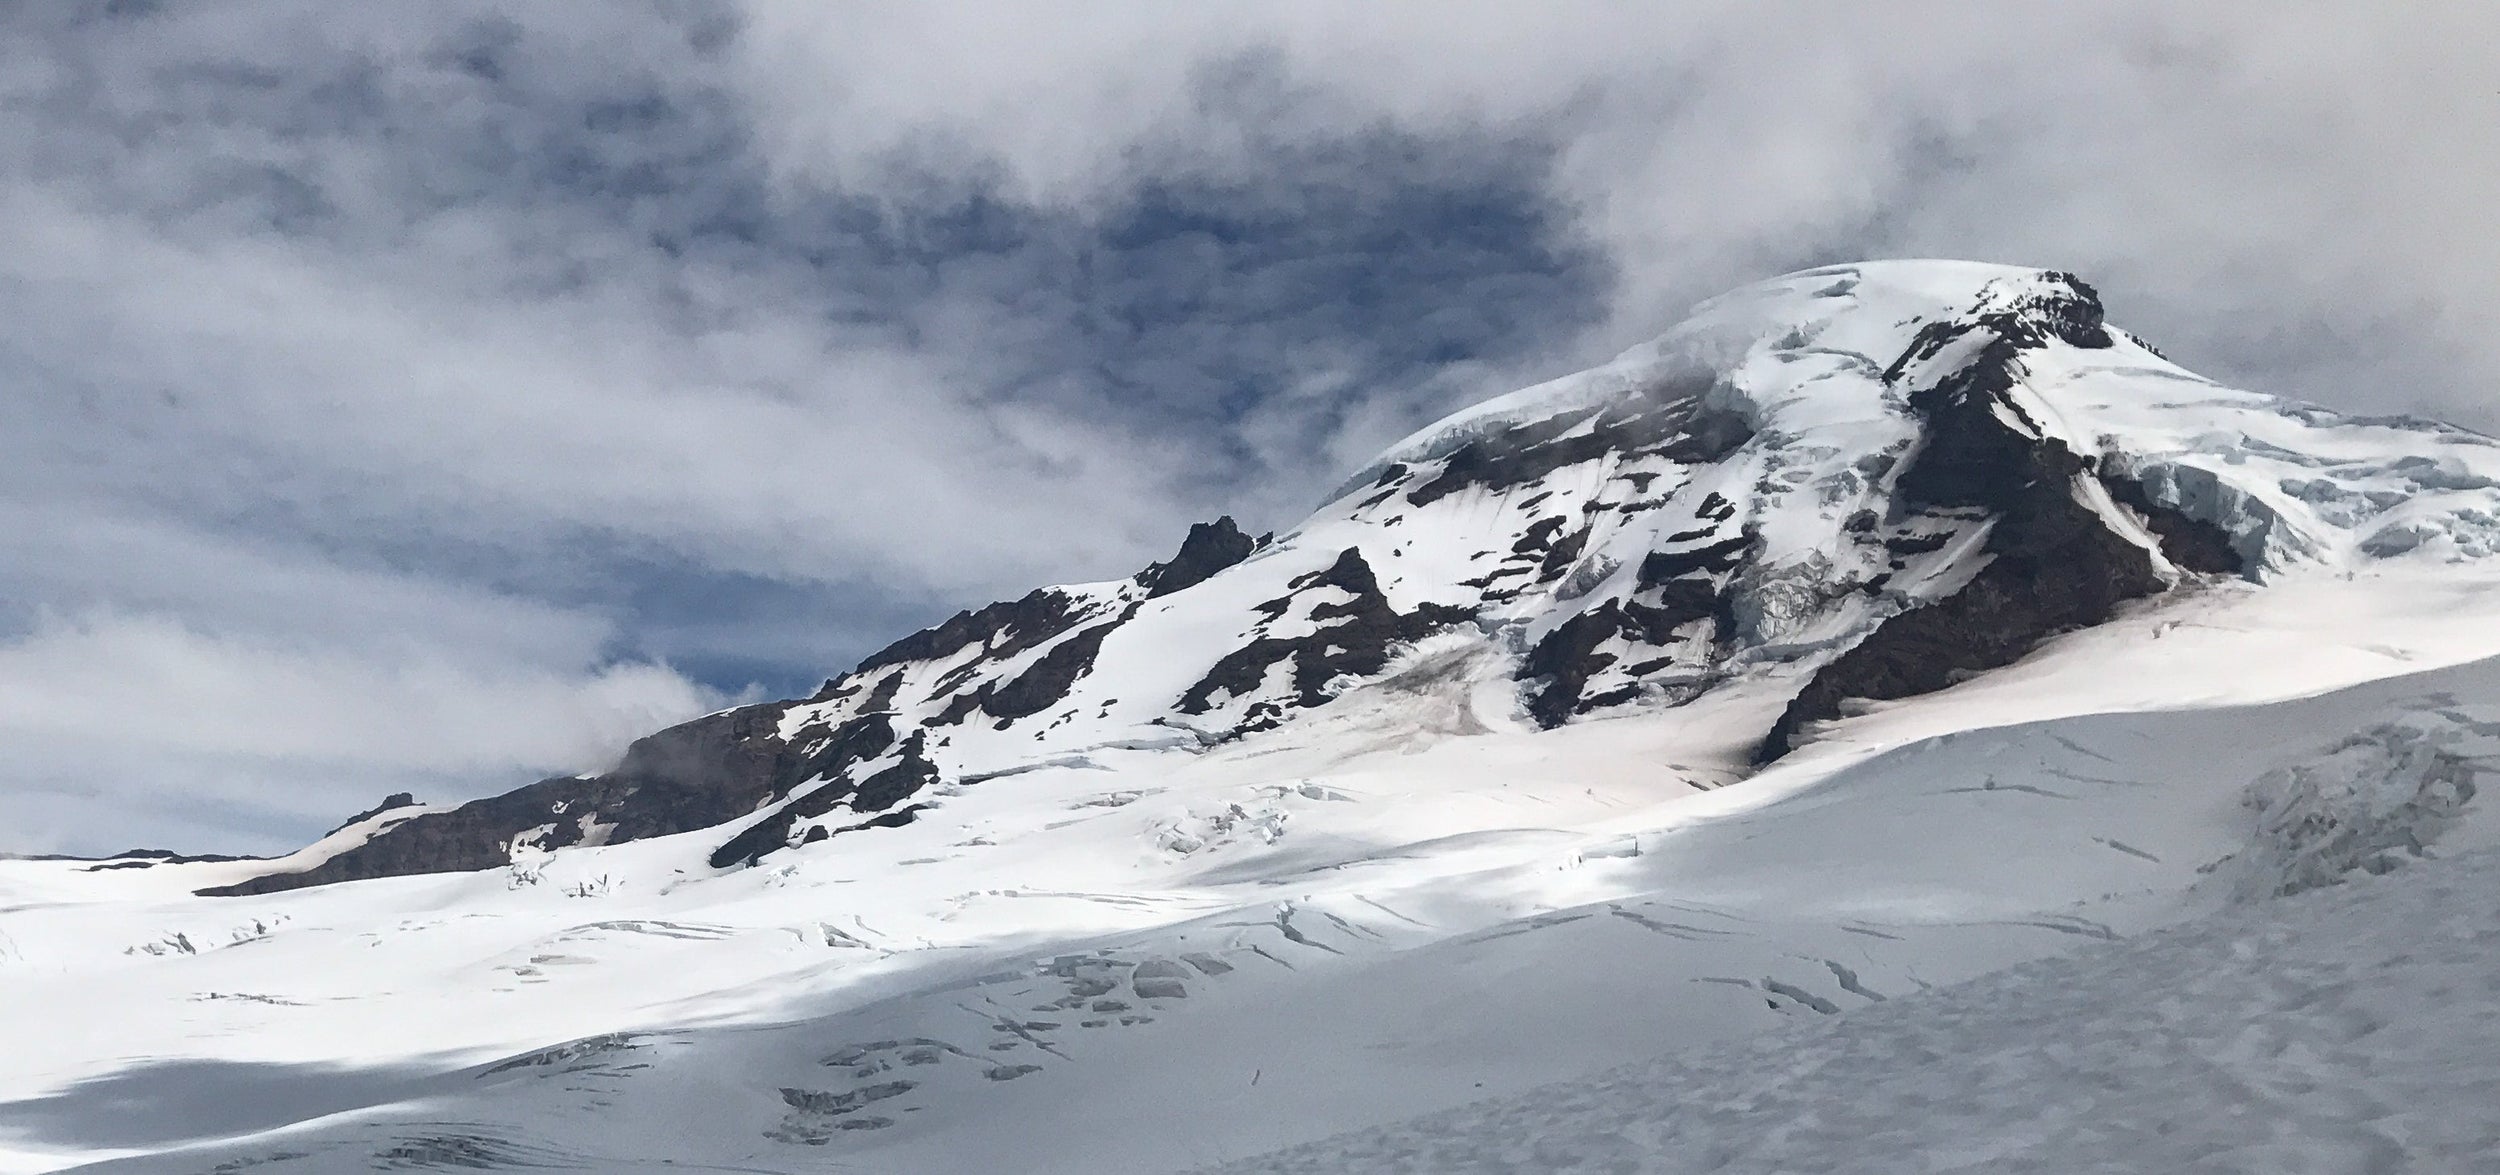 Crevasses in front of Mt Baker in Washington during a Blackbird Guides 4 day mountaineering skills seminar